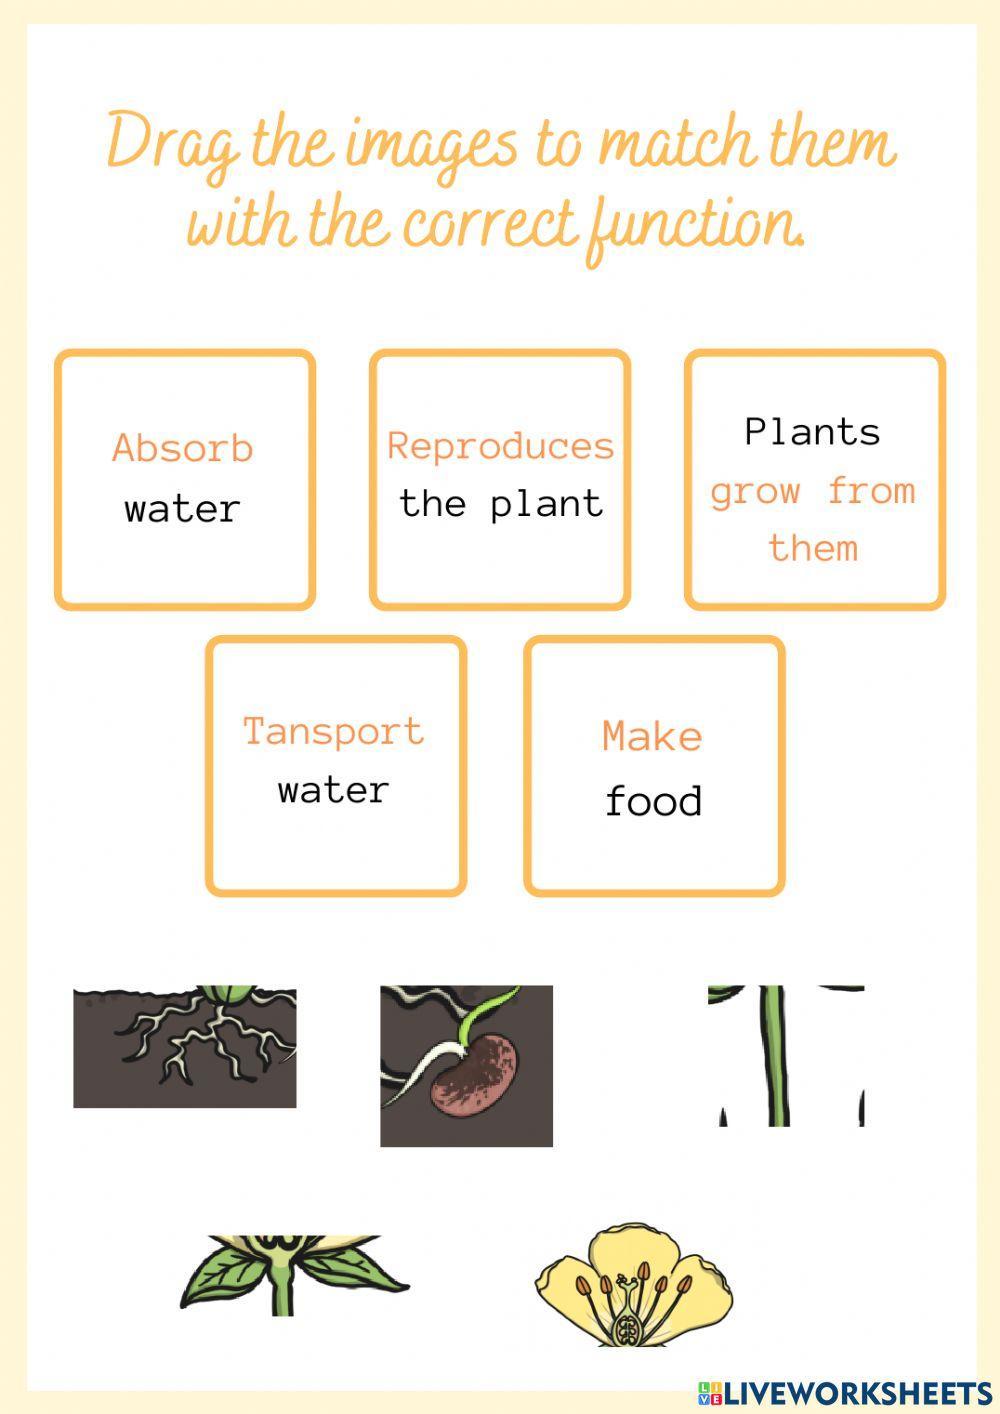 Functions of the parts of the plants